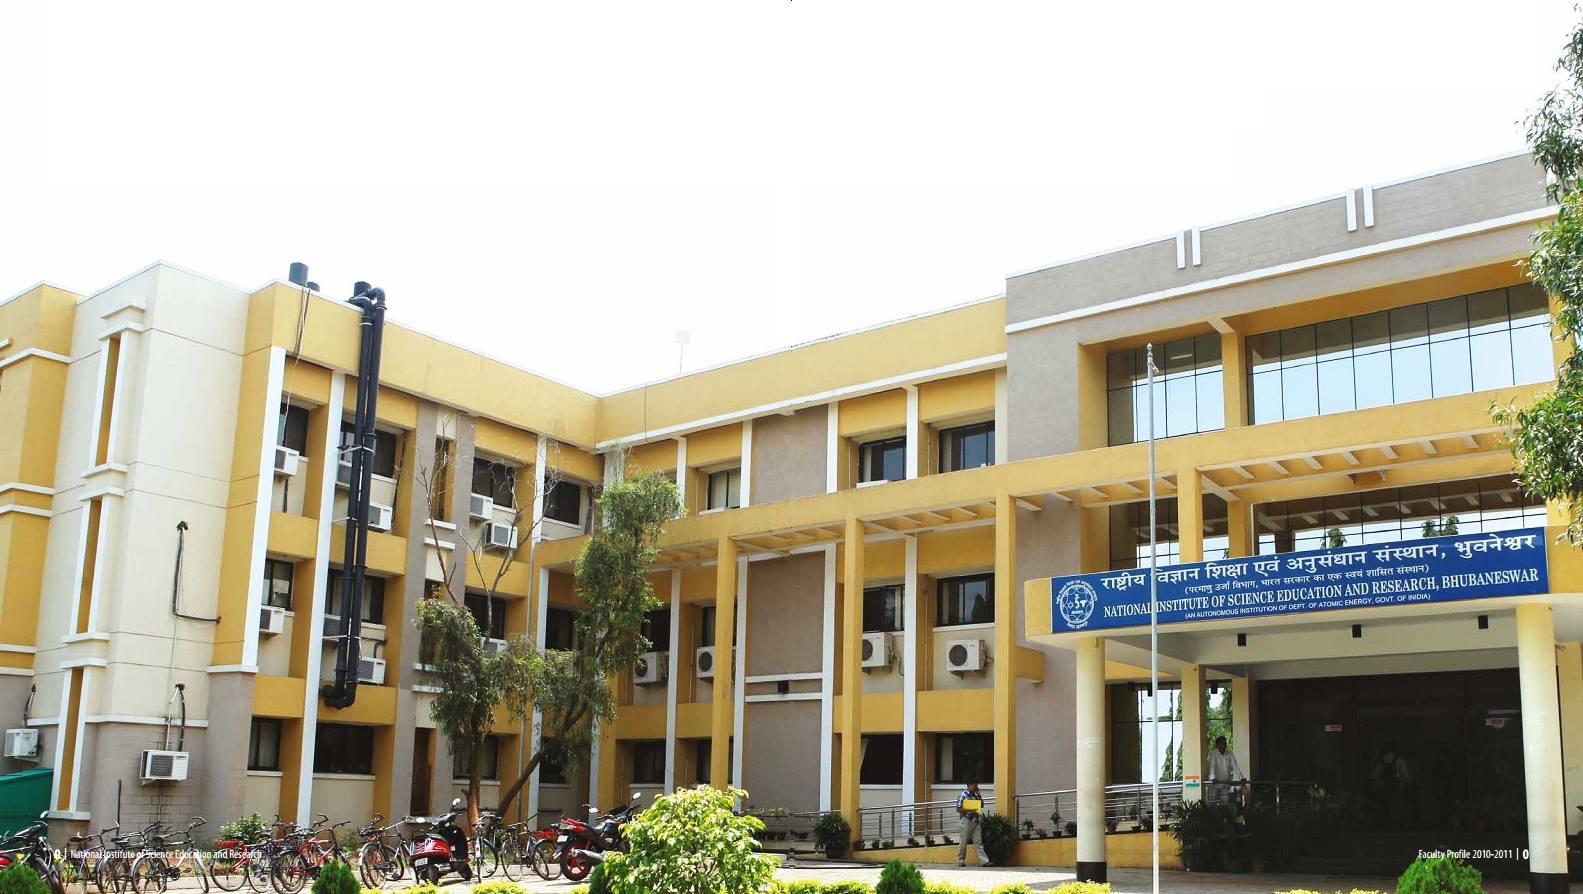 phd colleges in bbsr